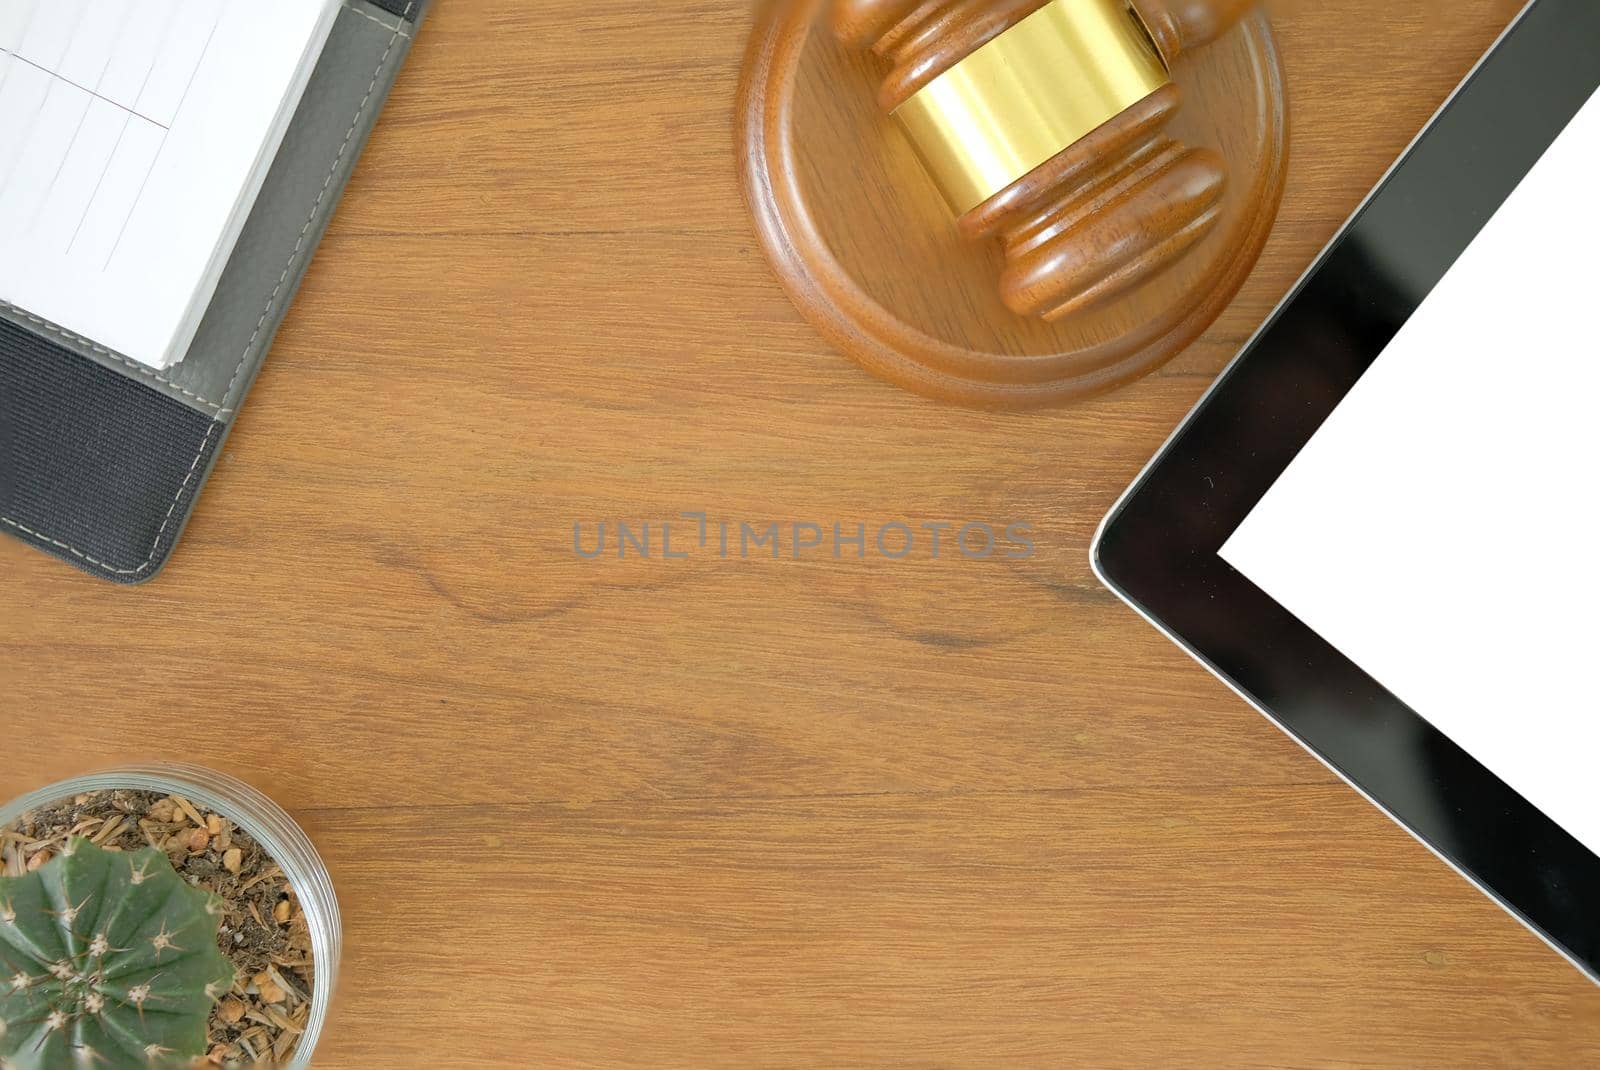 legal law judge gavel & tablet notebook at courtroom. lawyer attorney justice workplace. succulent cactus plant in pot.